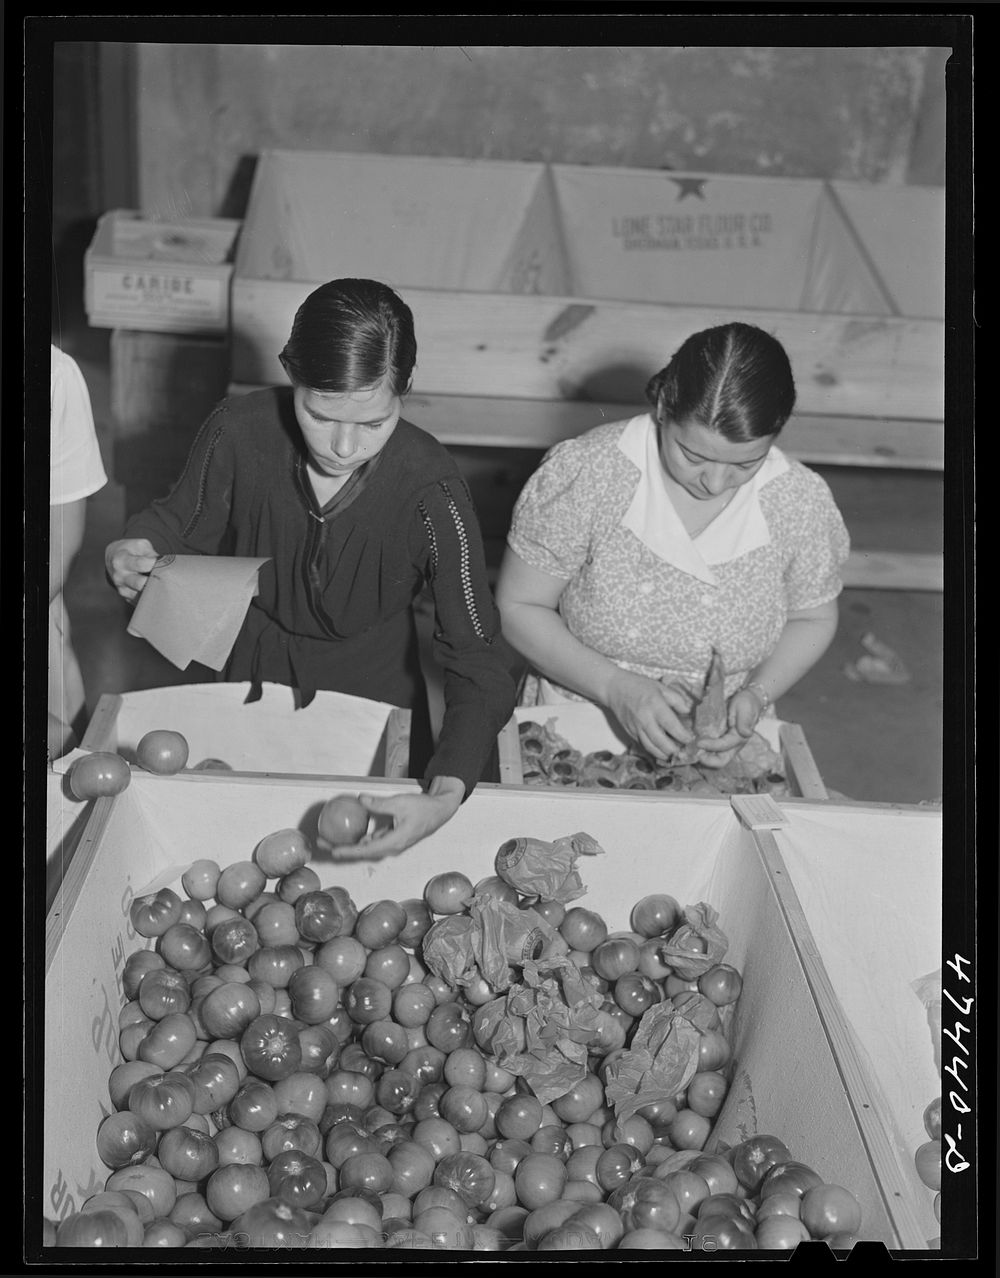 Yauco, Puerto Rico. Sorting and packing tomatoes at the Yauco cooperative tomato growers' association. Sourced from the…